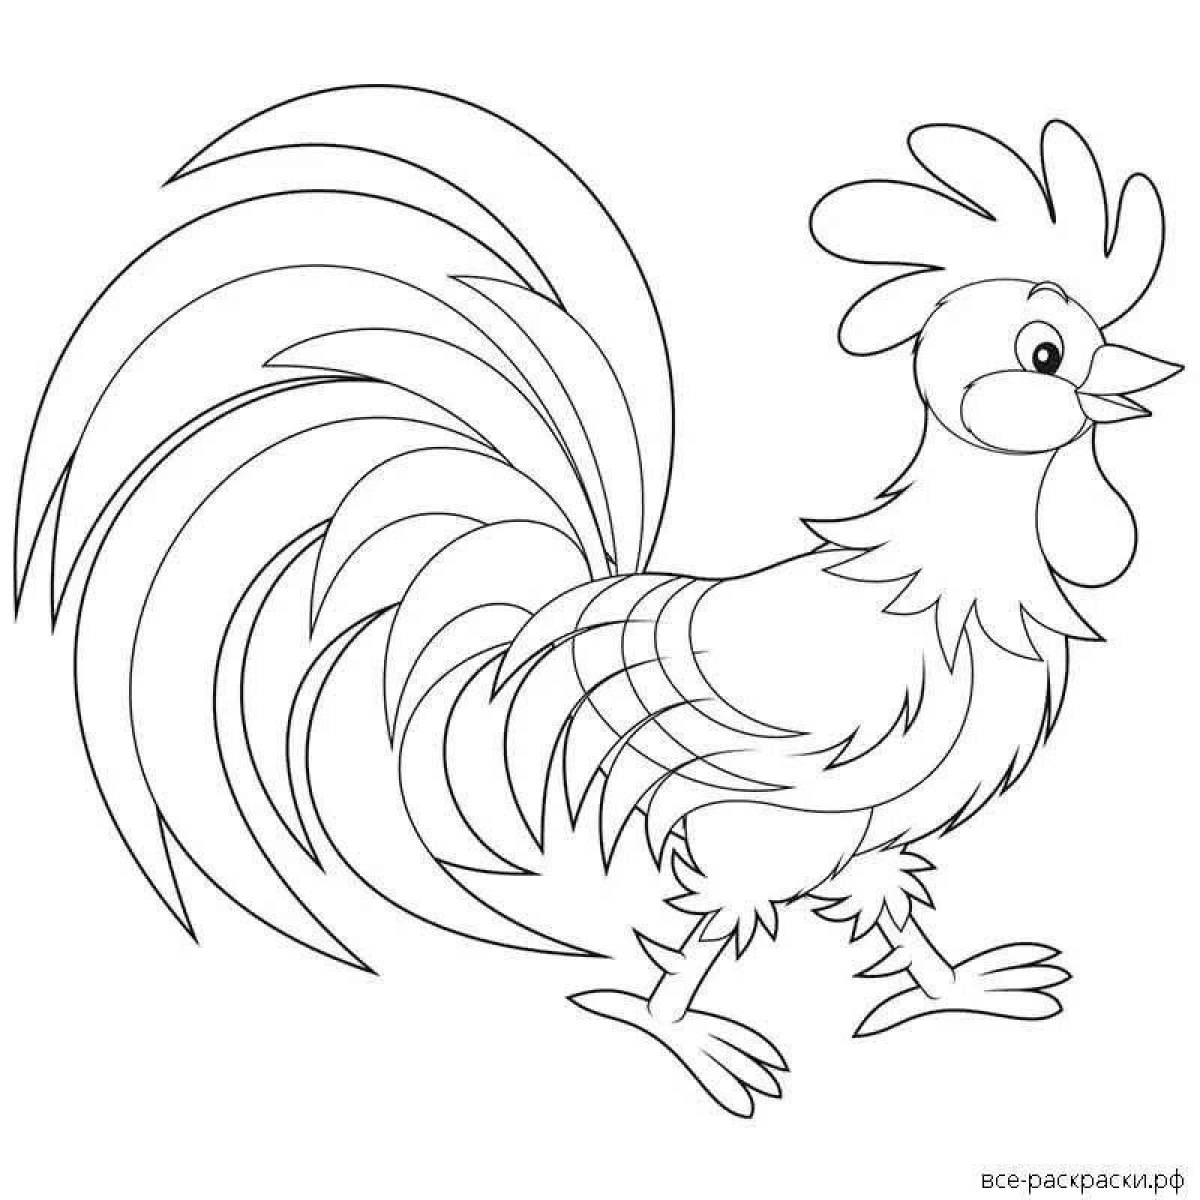 Colouring joyful rooster for kids